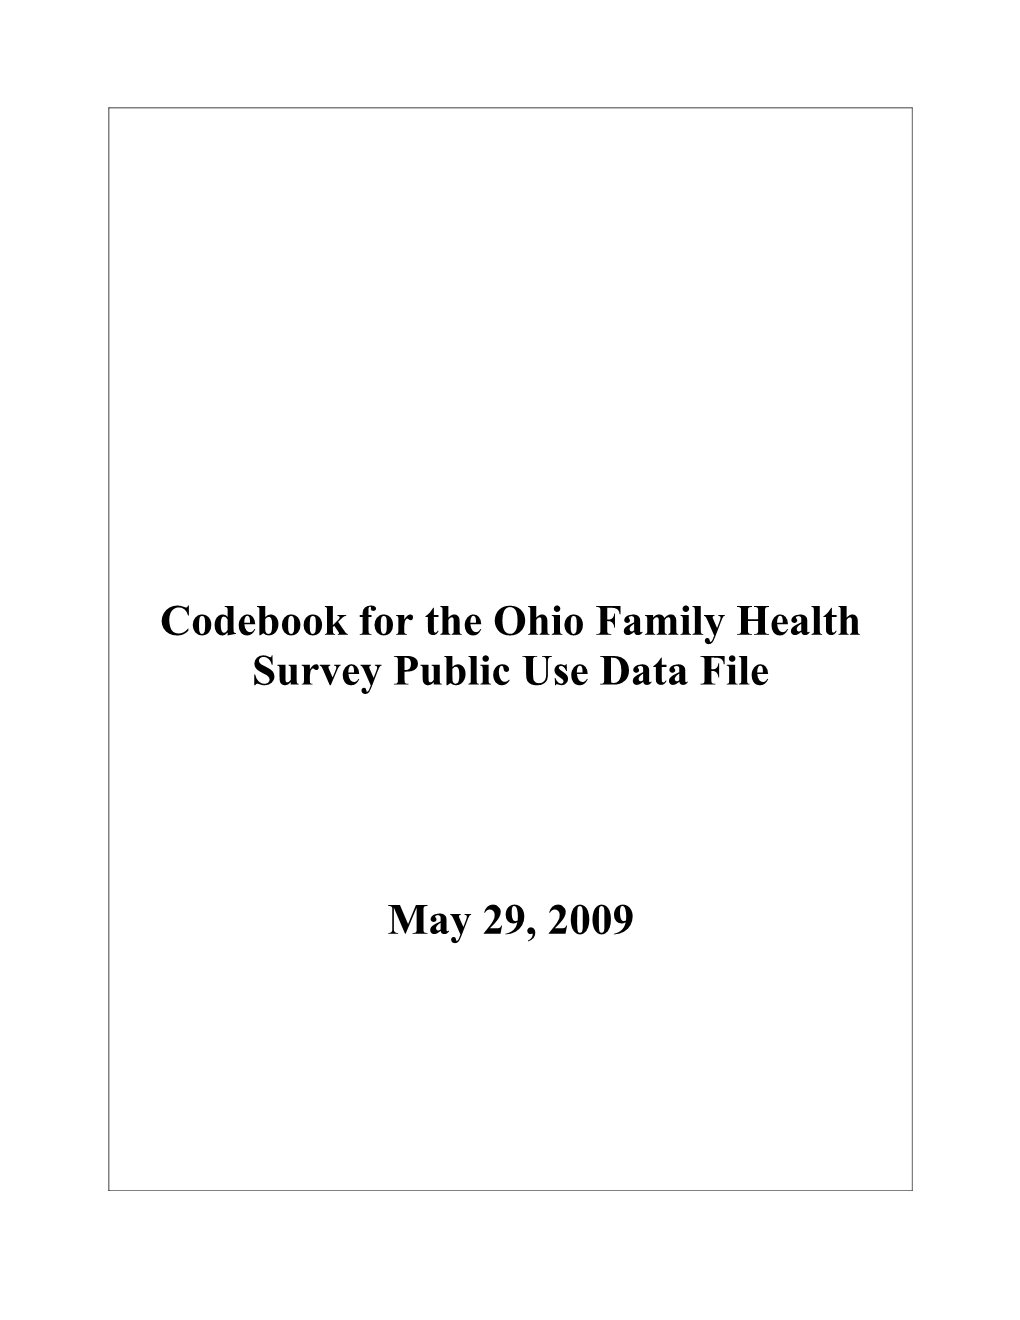 Codebook for the Ohio Family Health Survey Public Use Data File